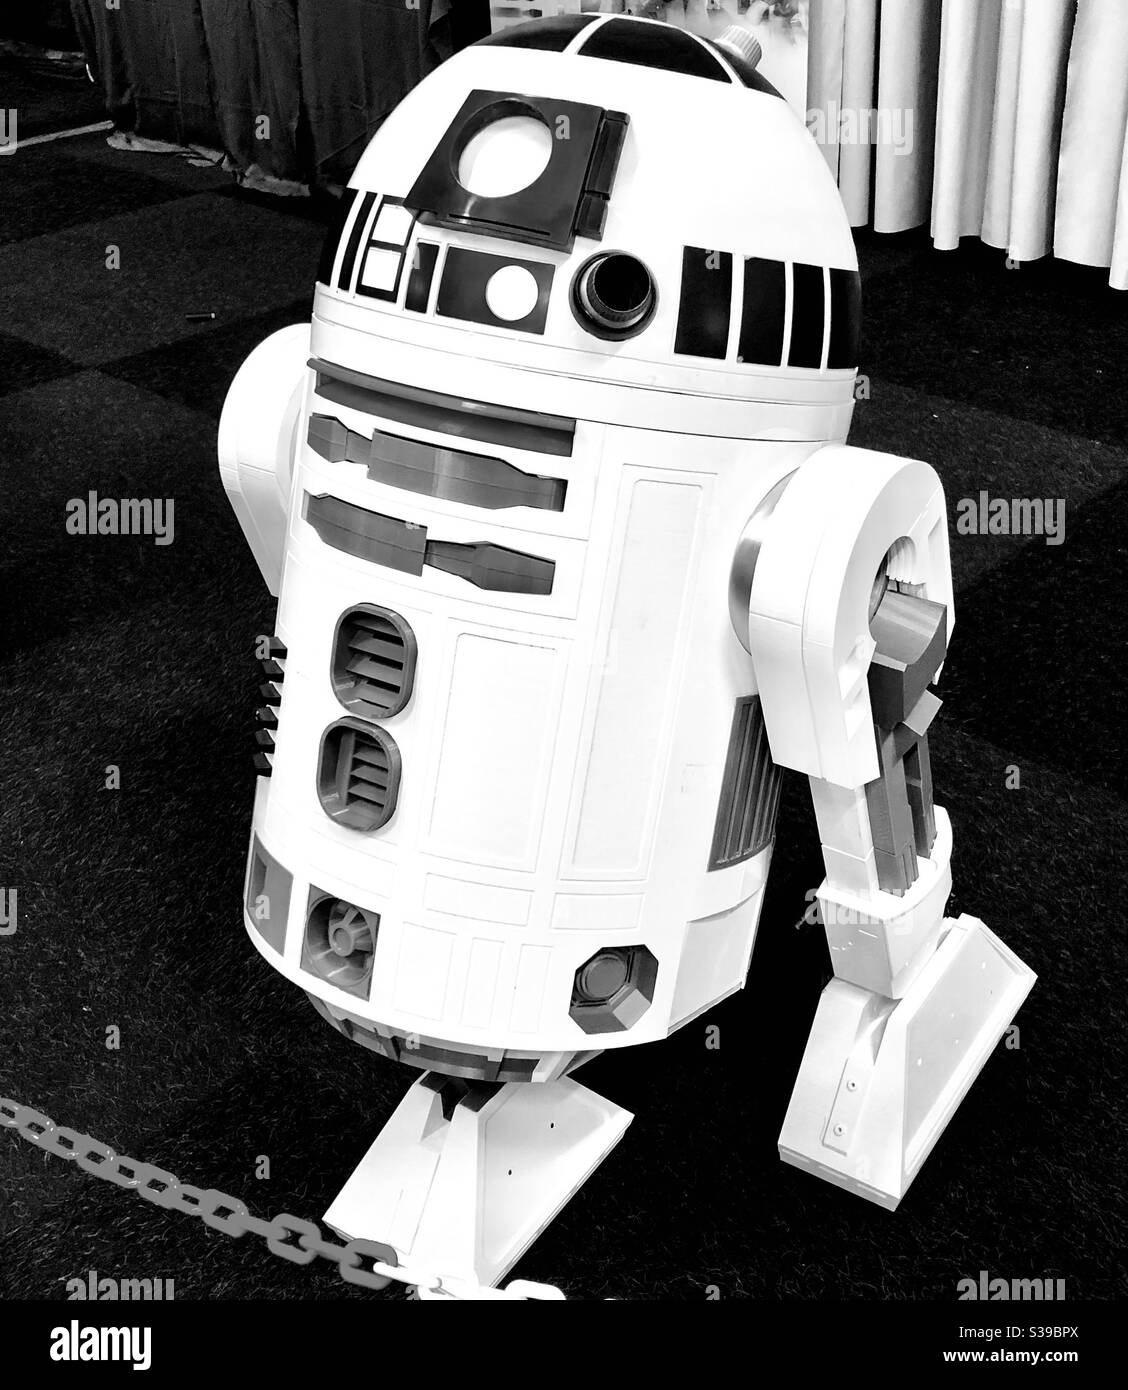 R2-D2 from Star Wars in a science fiction convention. Stock Photo